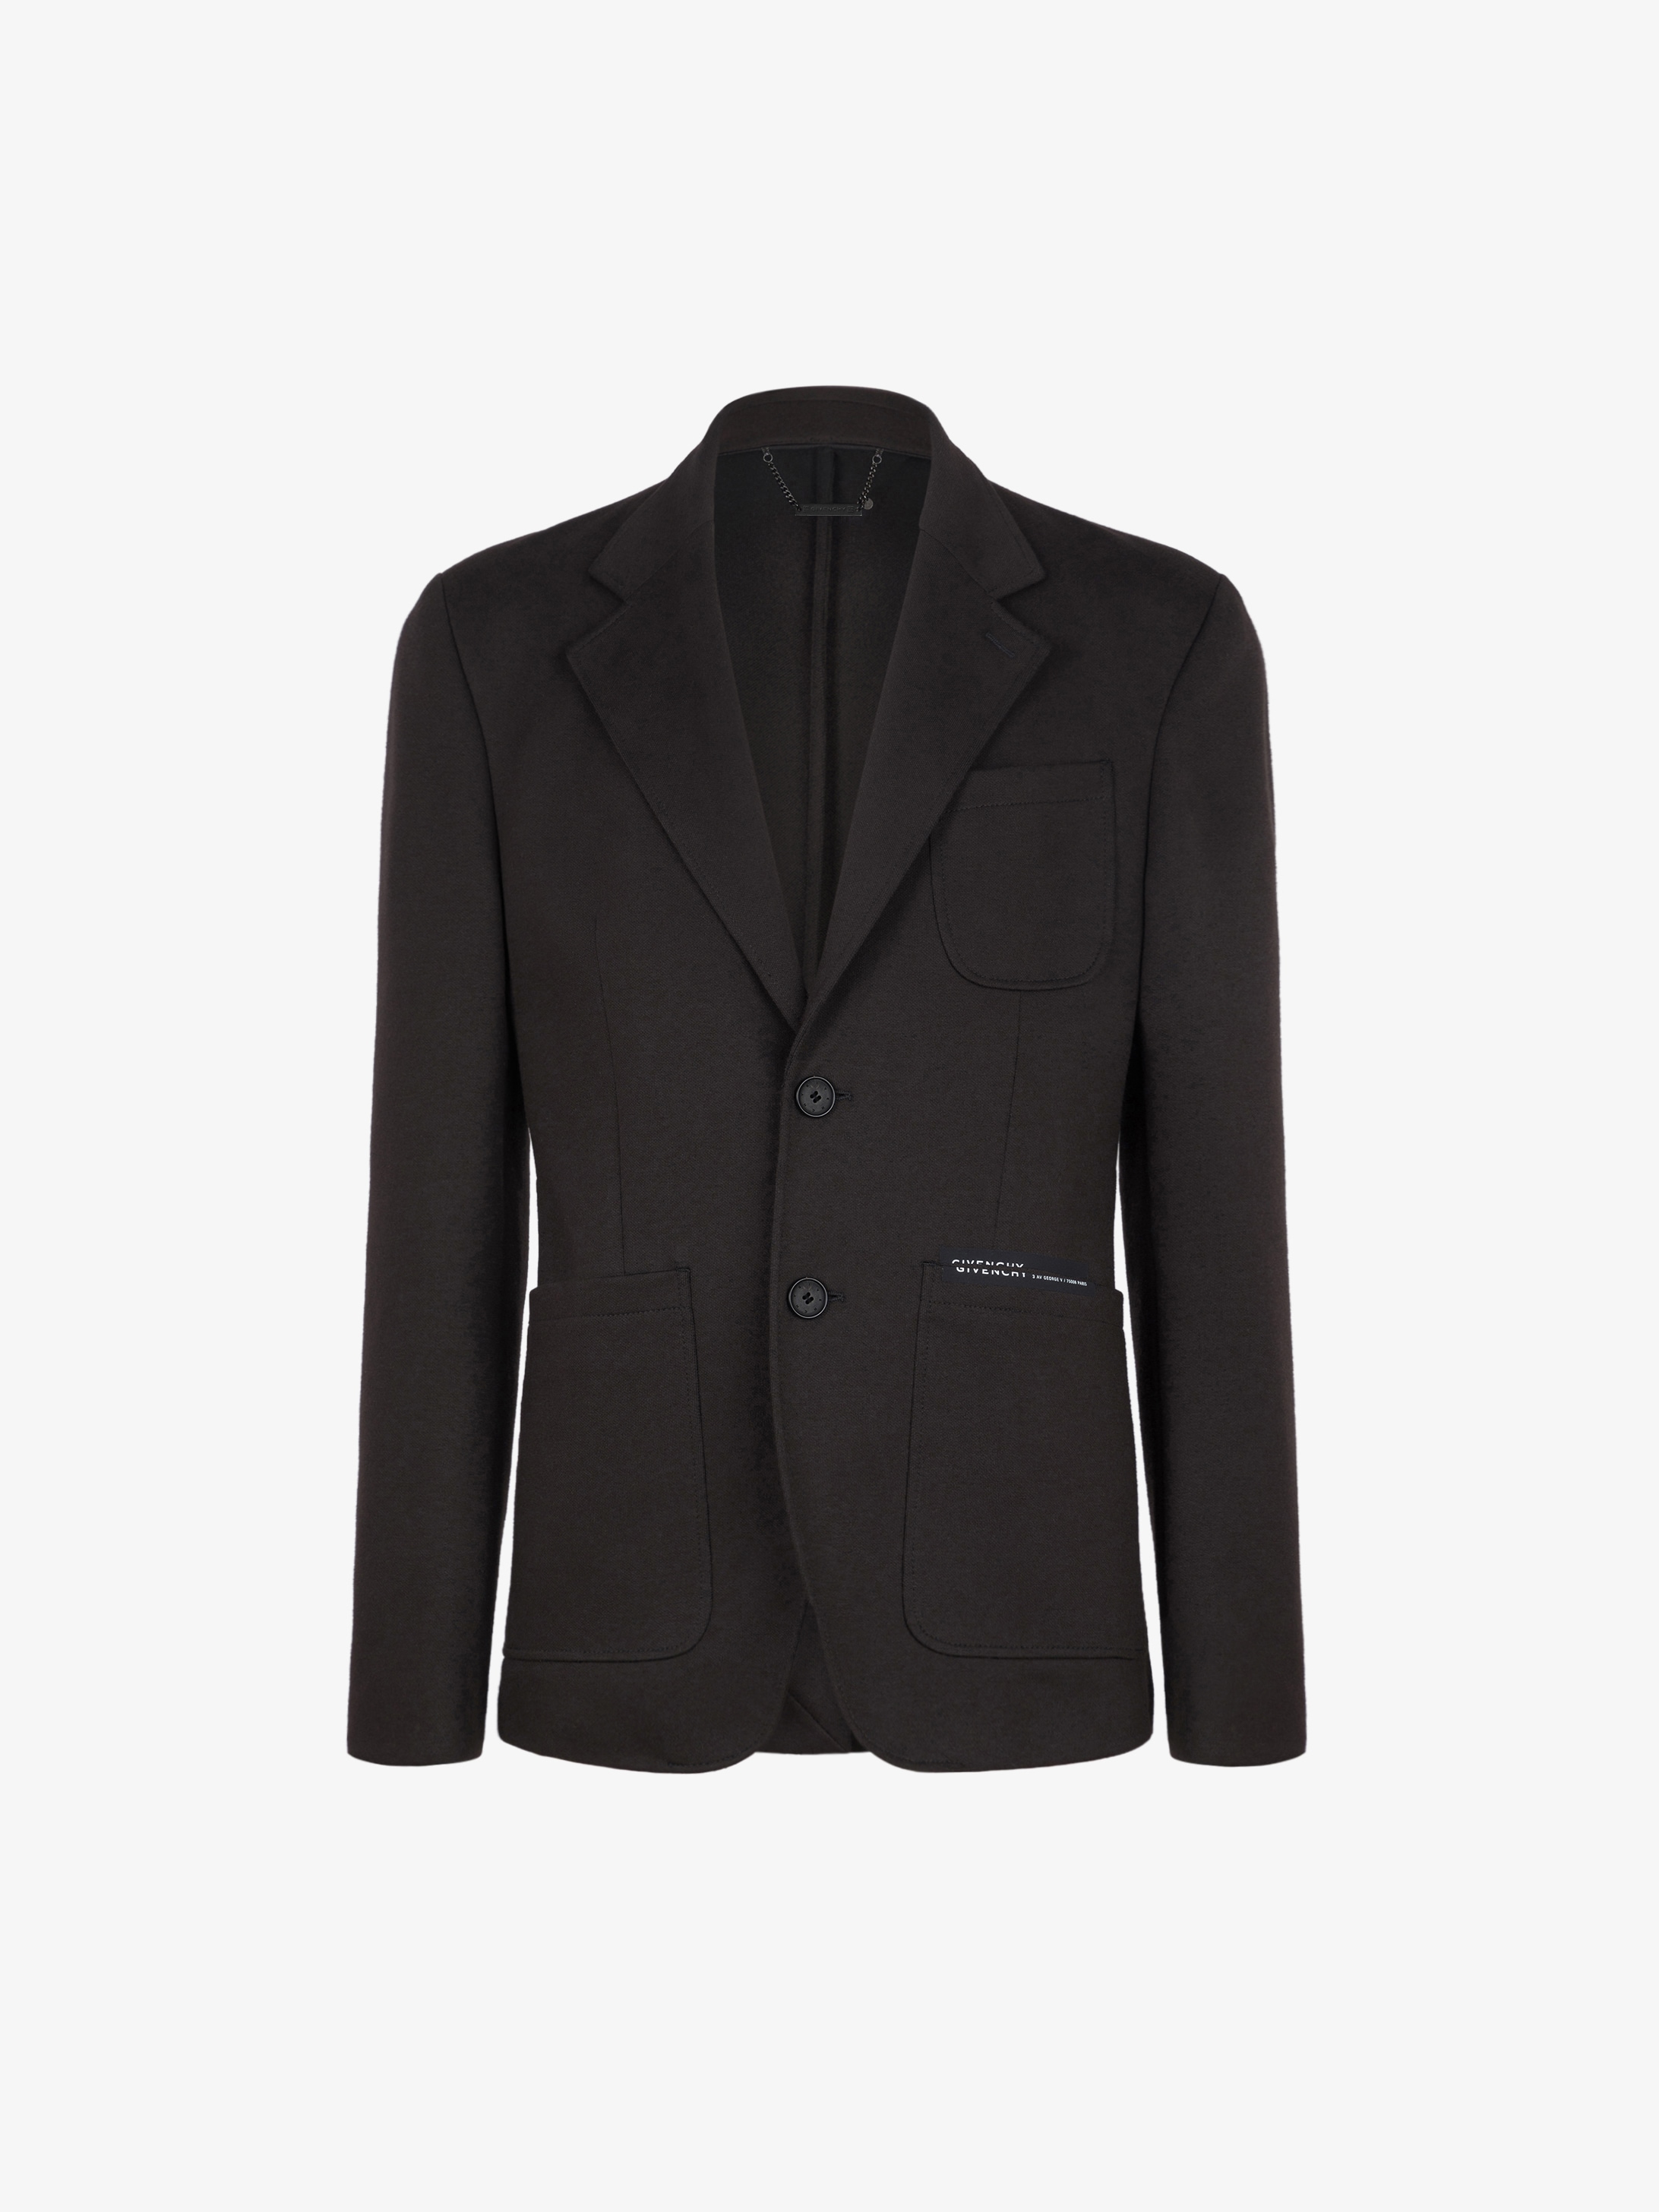 GIVENCHY ADDRESS jacket in jersey | GIVENCHY Paris